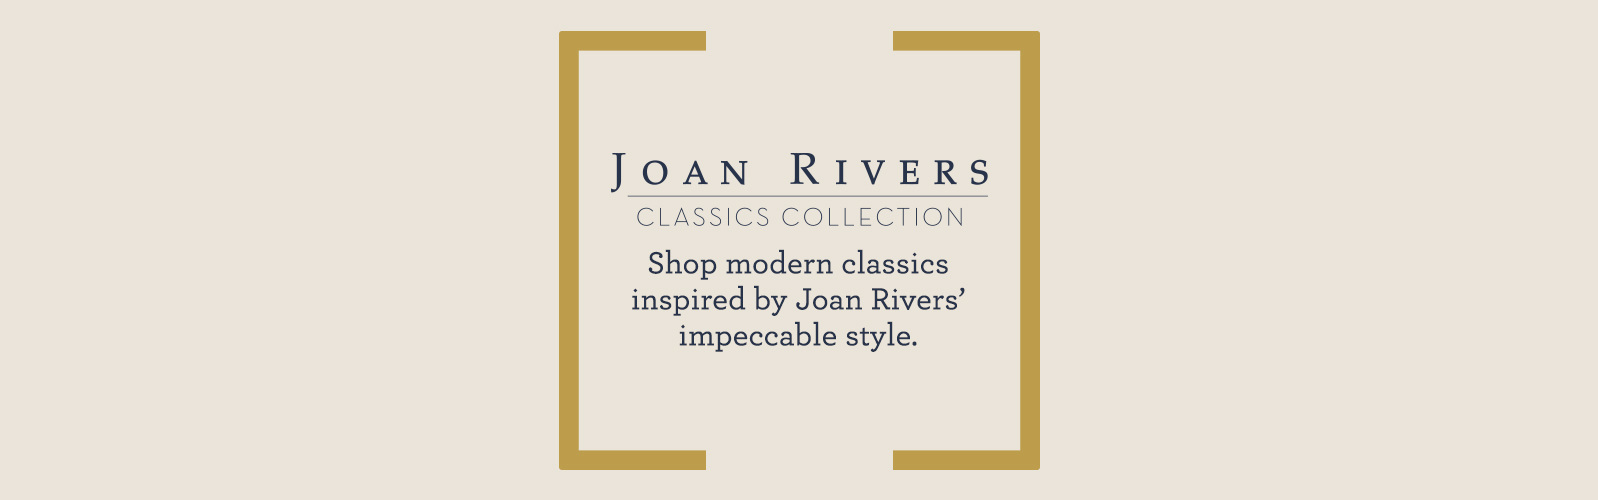 Shop modern classics inspired by Joan Rivers' impeccable style.